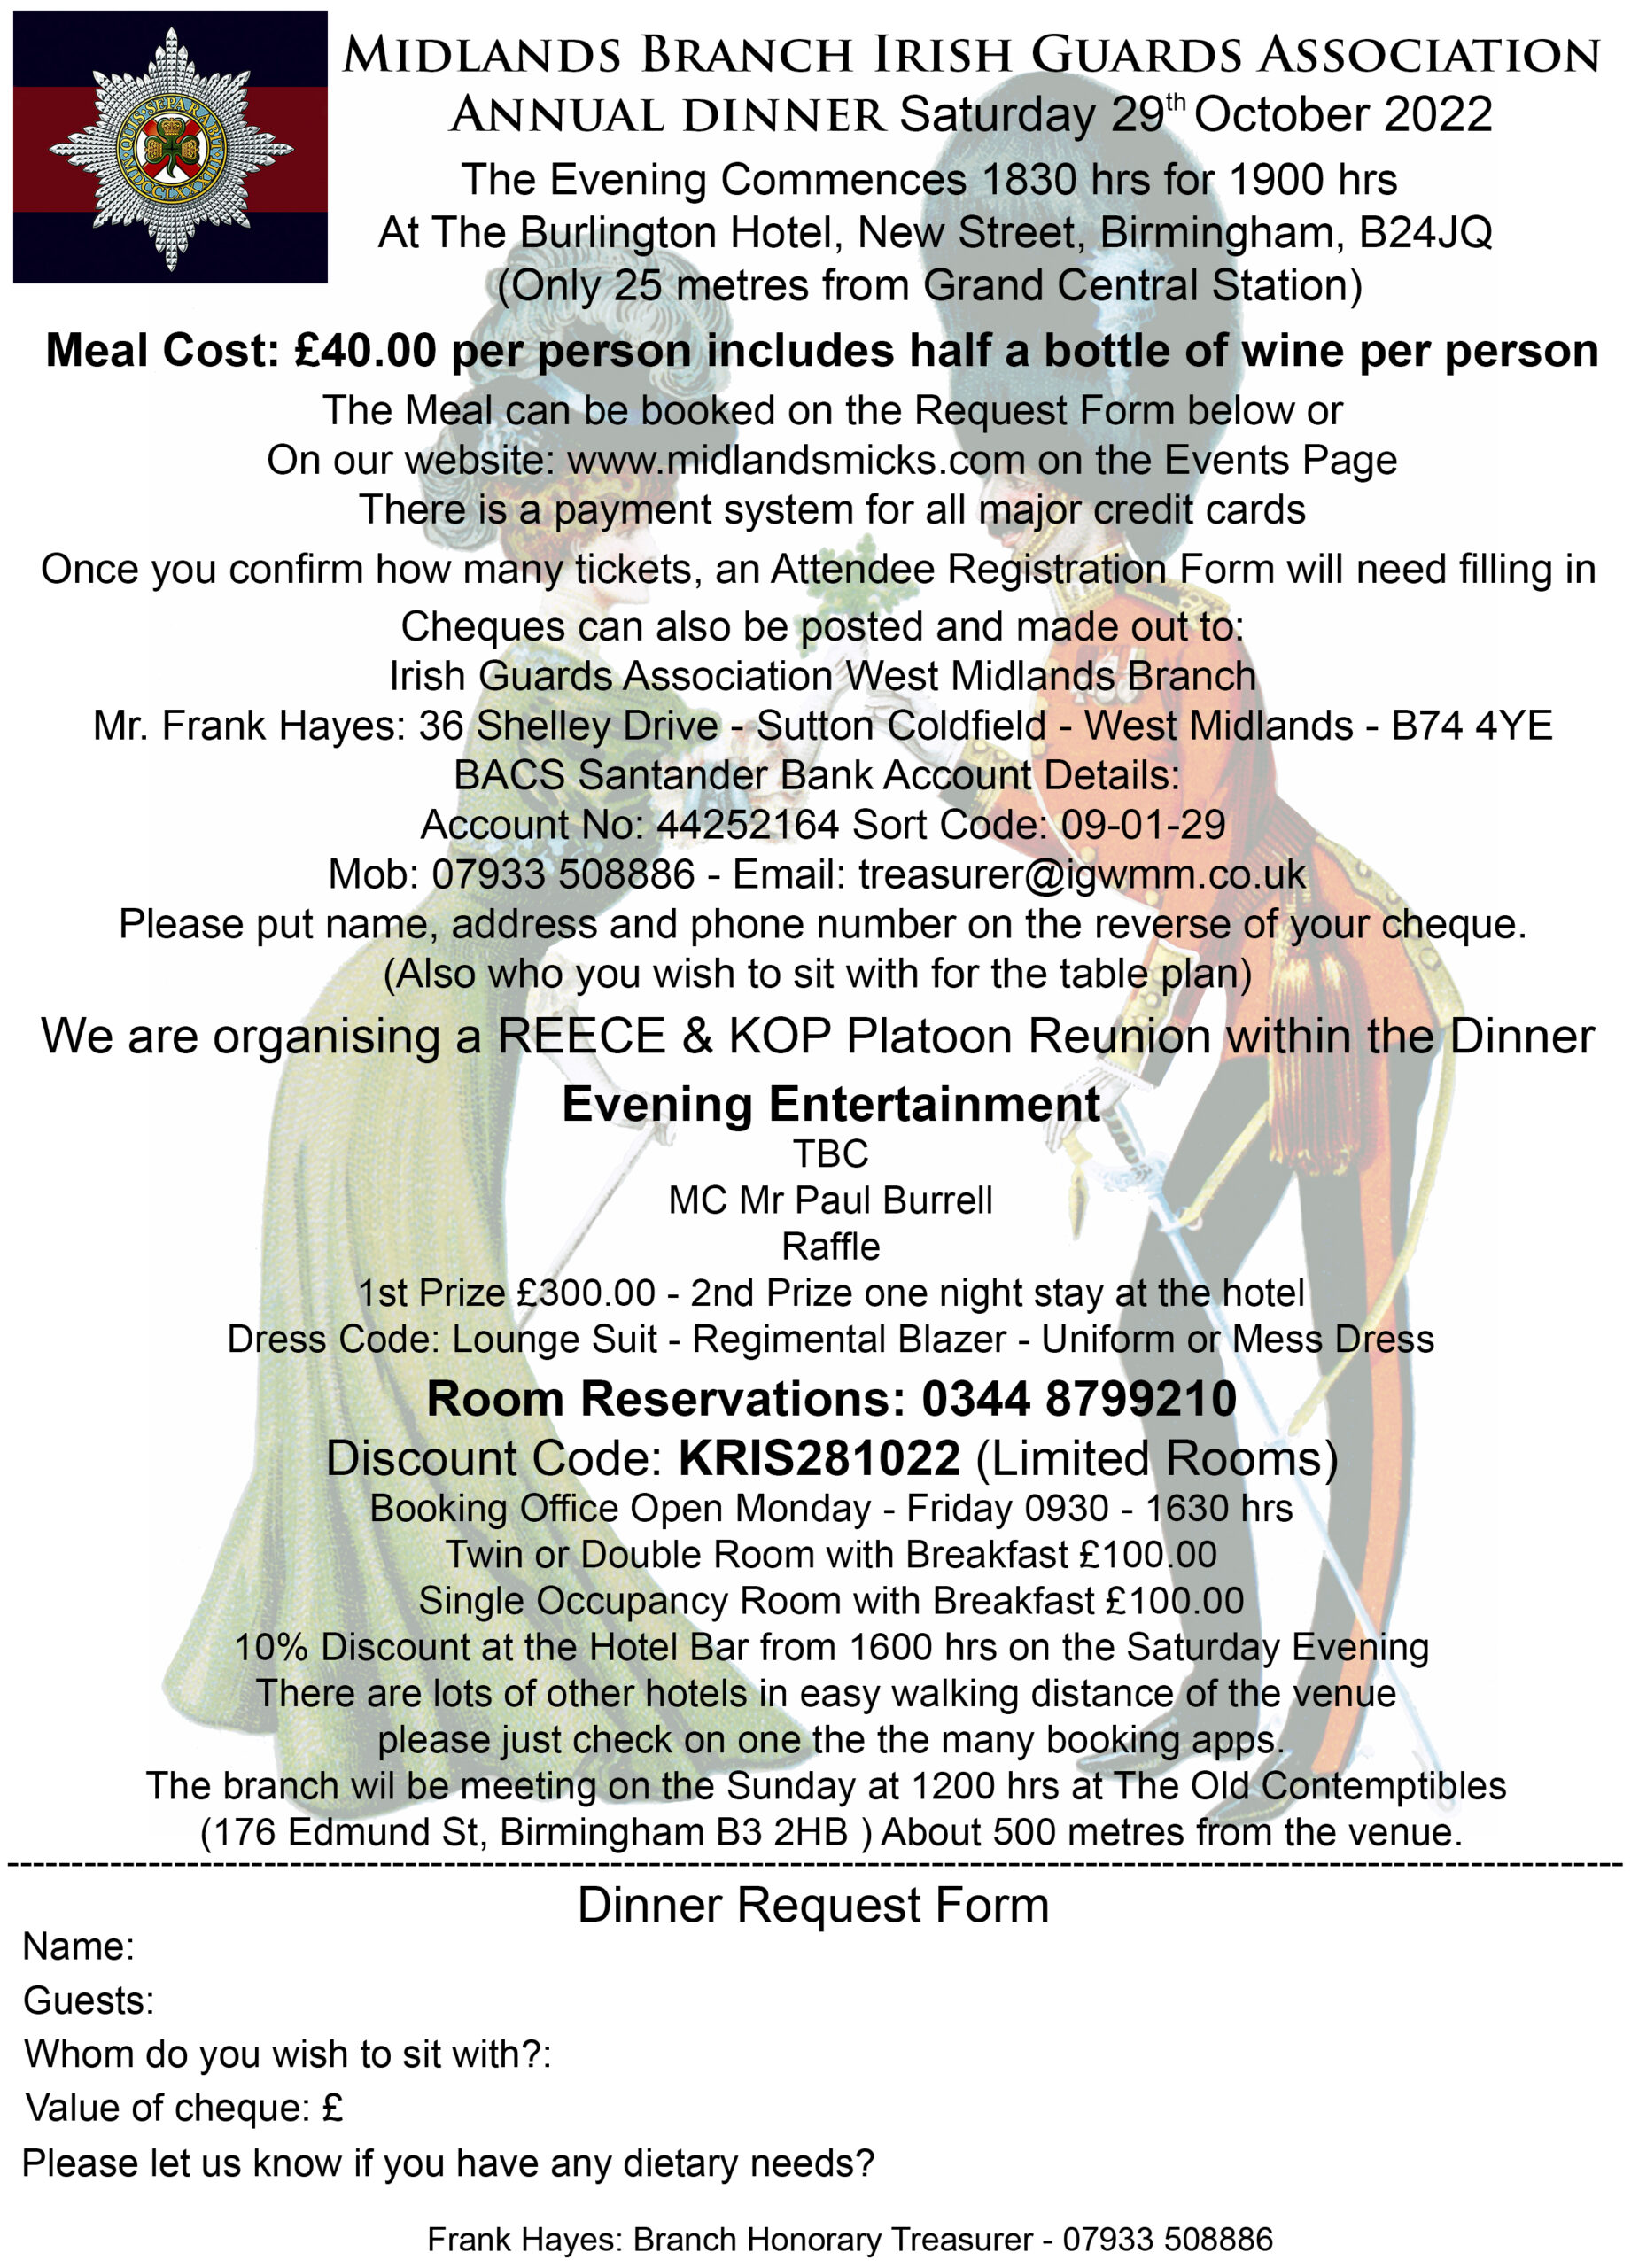 picture of the details of the royal irish dinner